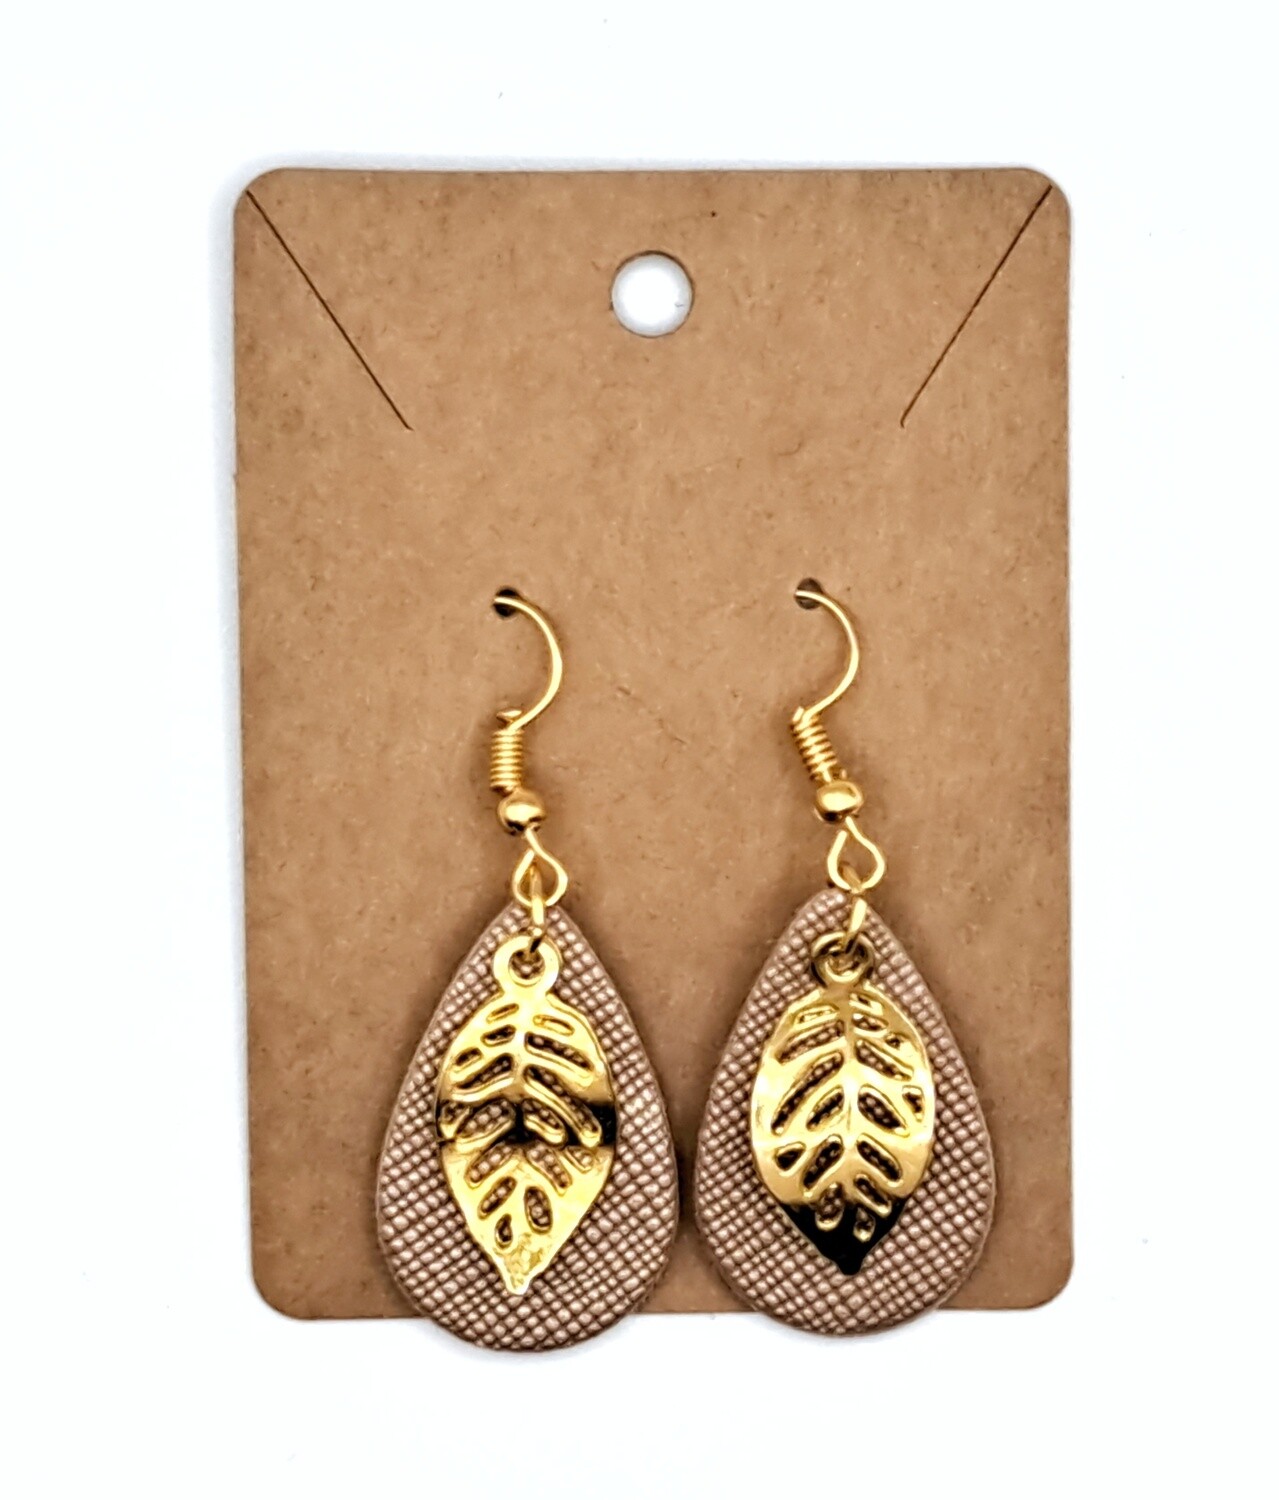 Handmade Faux Leather Teardrop with Gold Leaf Charms Earrings